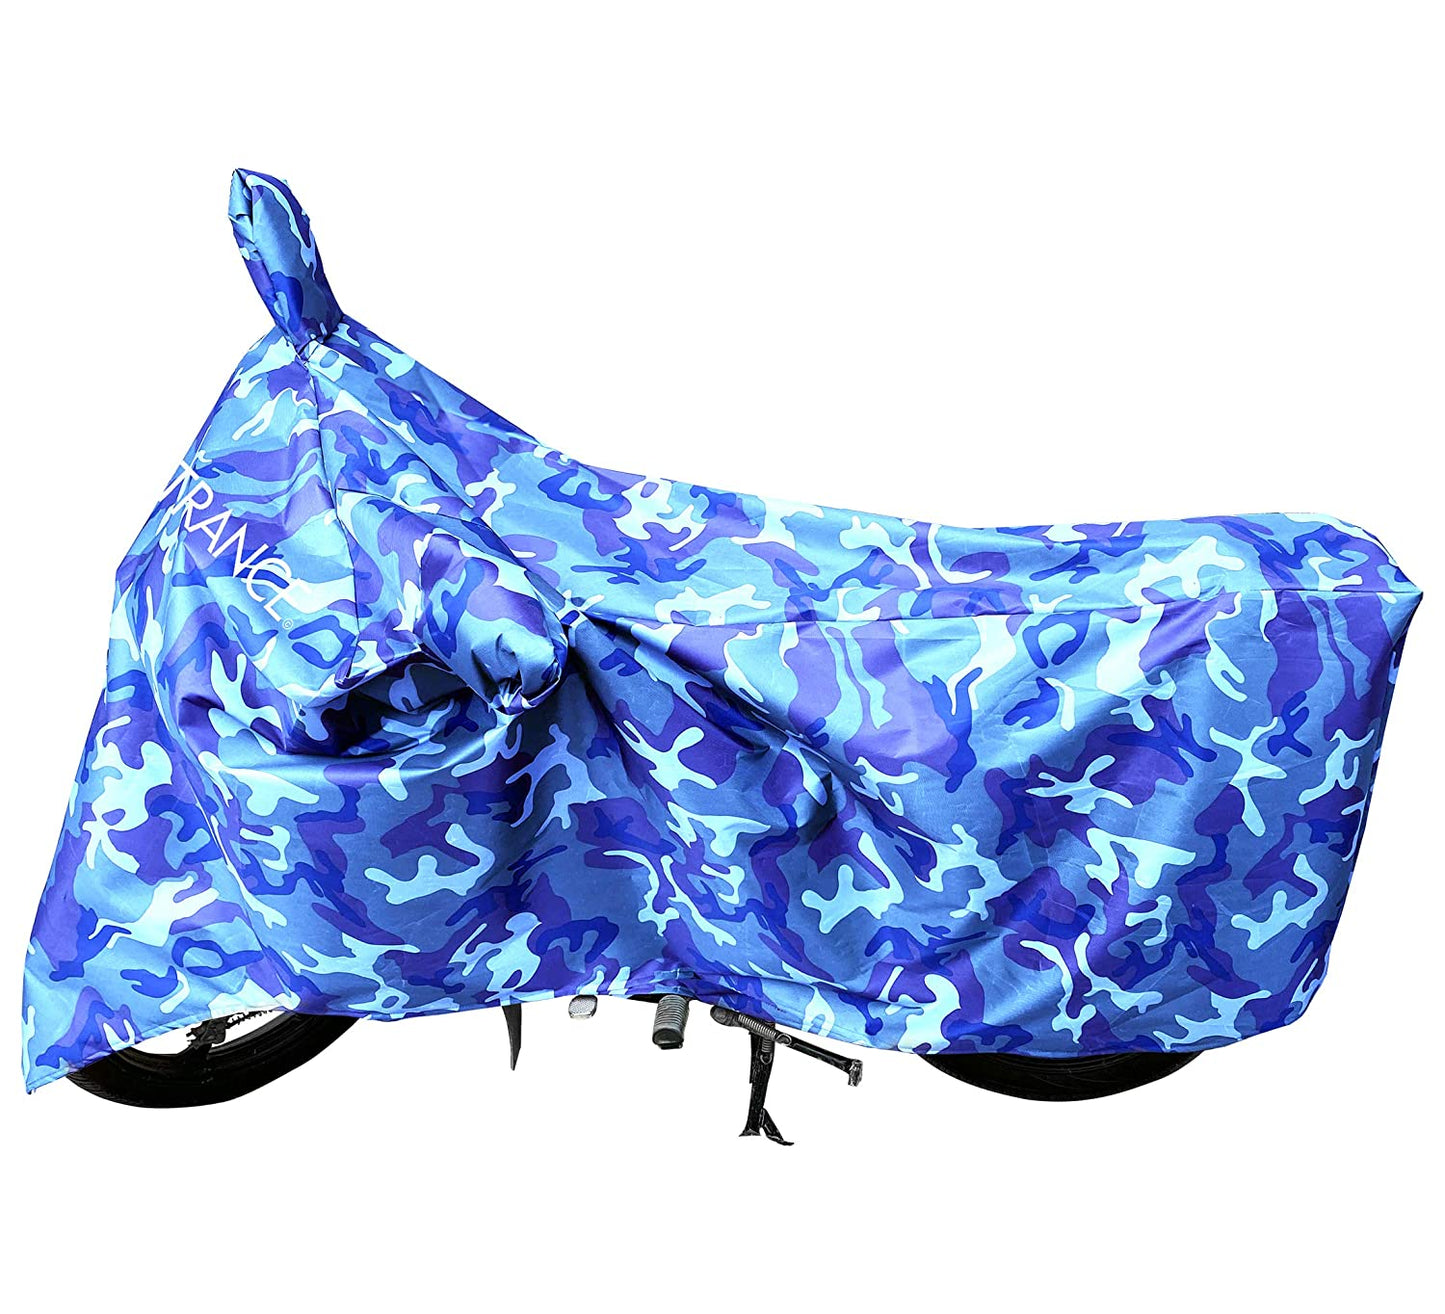 MotoTrance Jungle Bike Body Covers For LML Freedom LS - Interlock-Stitched Waterproof and Heat Resistant with Mirror Pockets